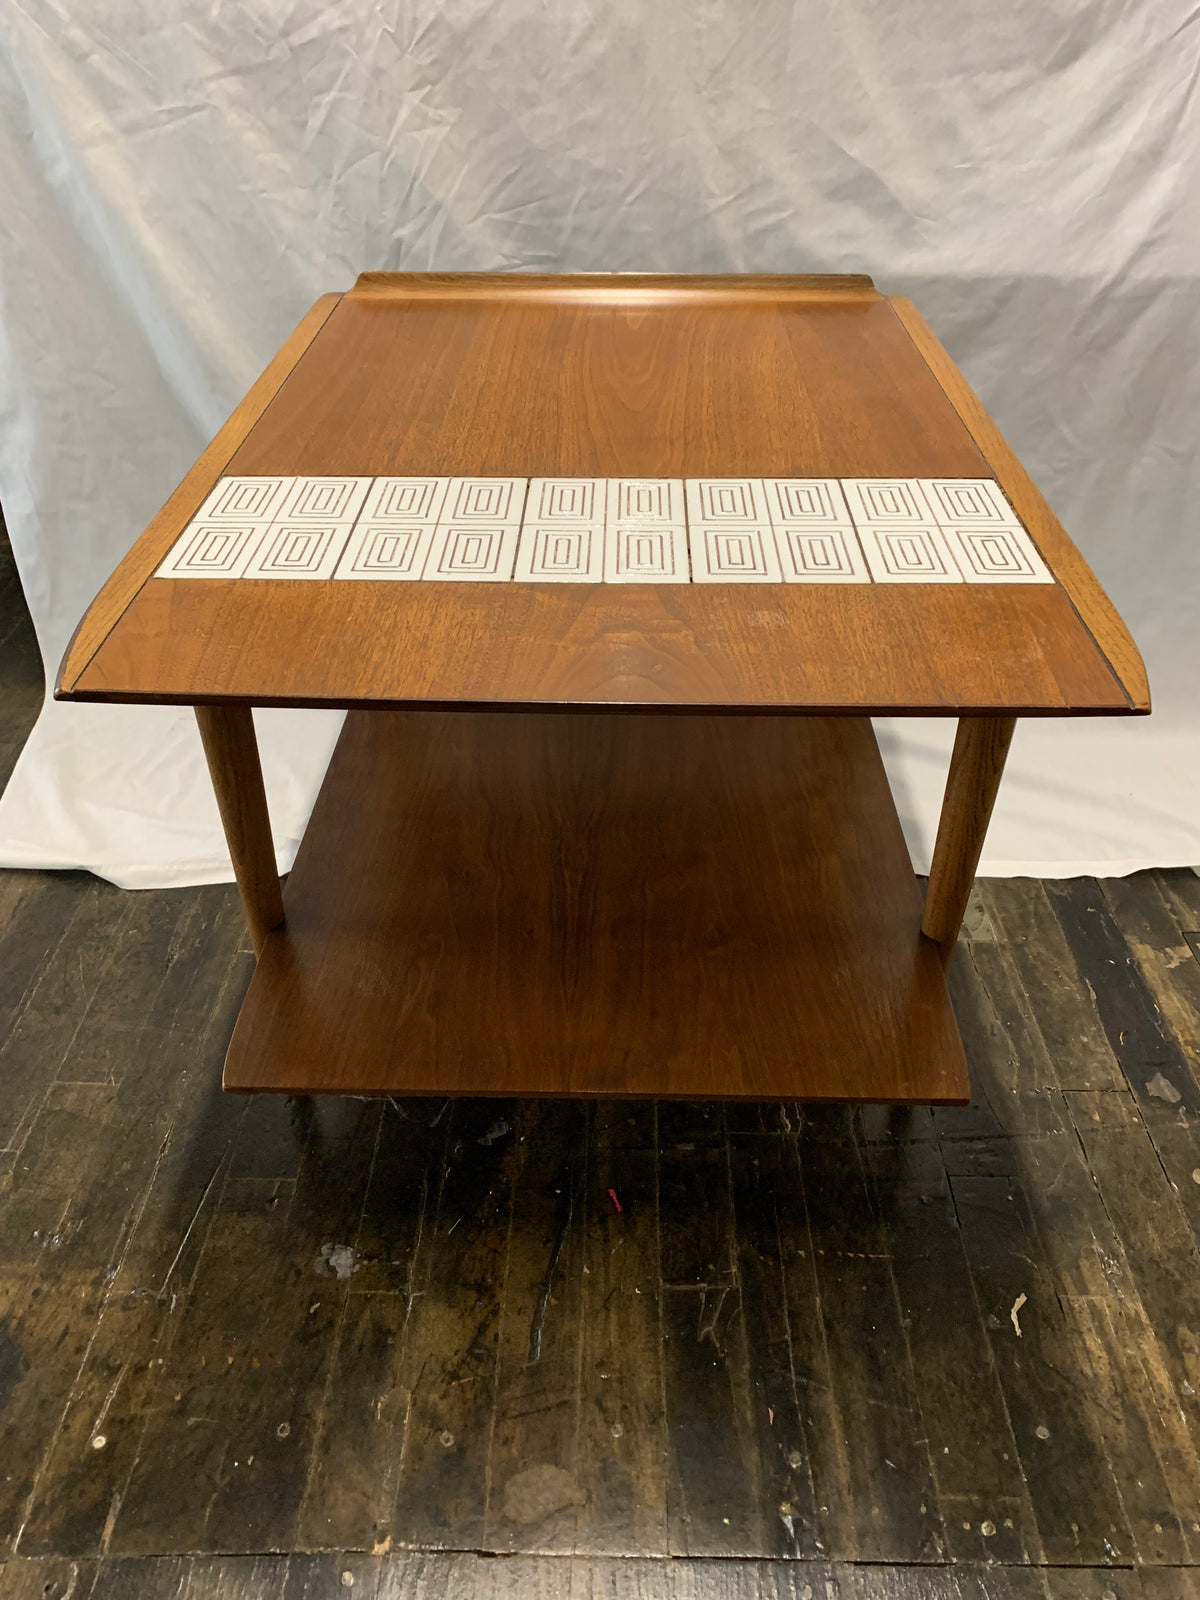 Rare mid-century lane side table, tile insert, beautiful brand trim, lower shelf.  Original condition. Studio Sonja Milan, Chicago by appointment